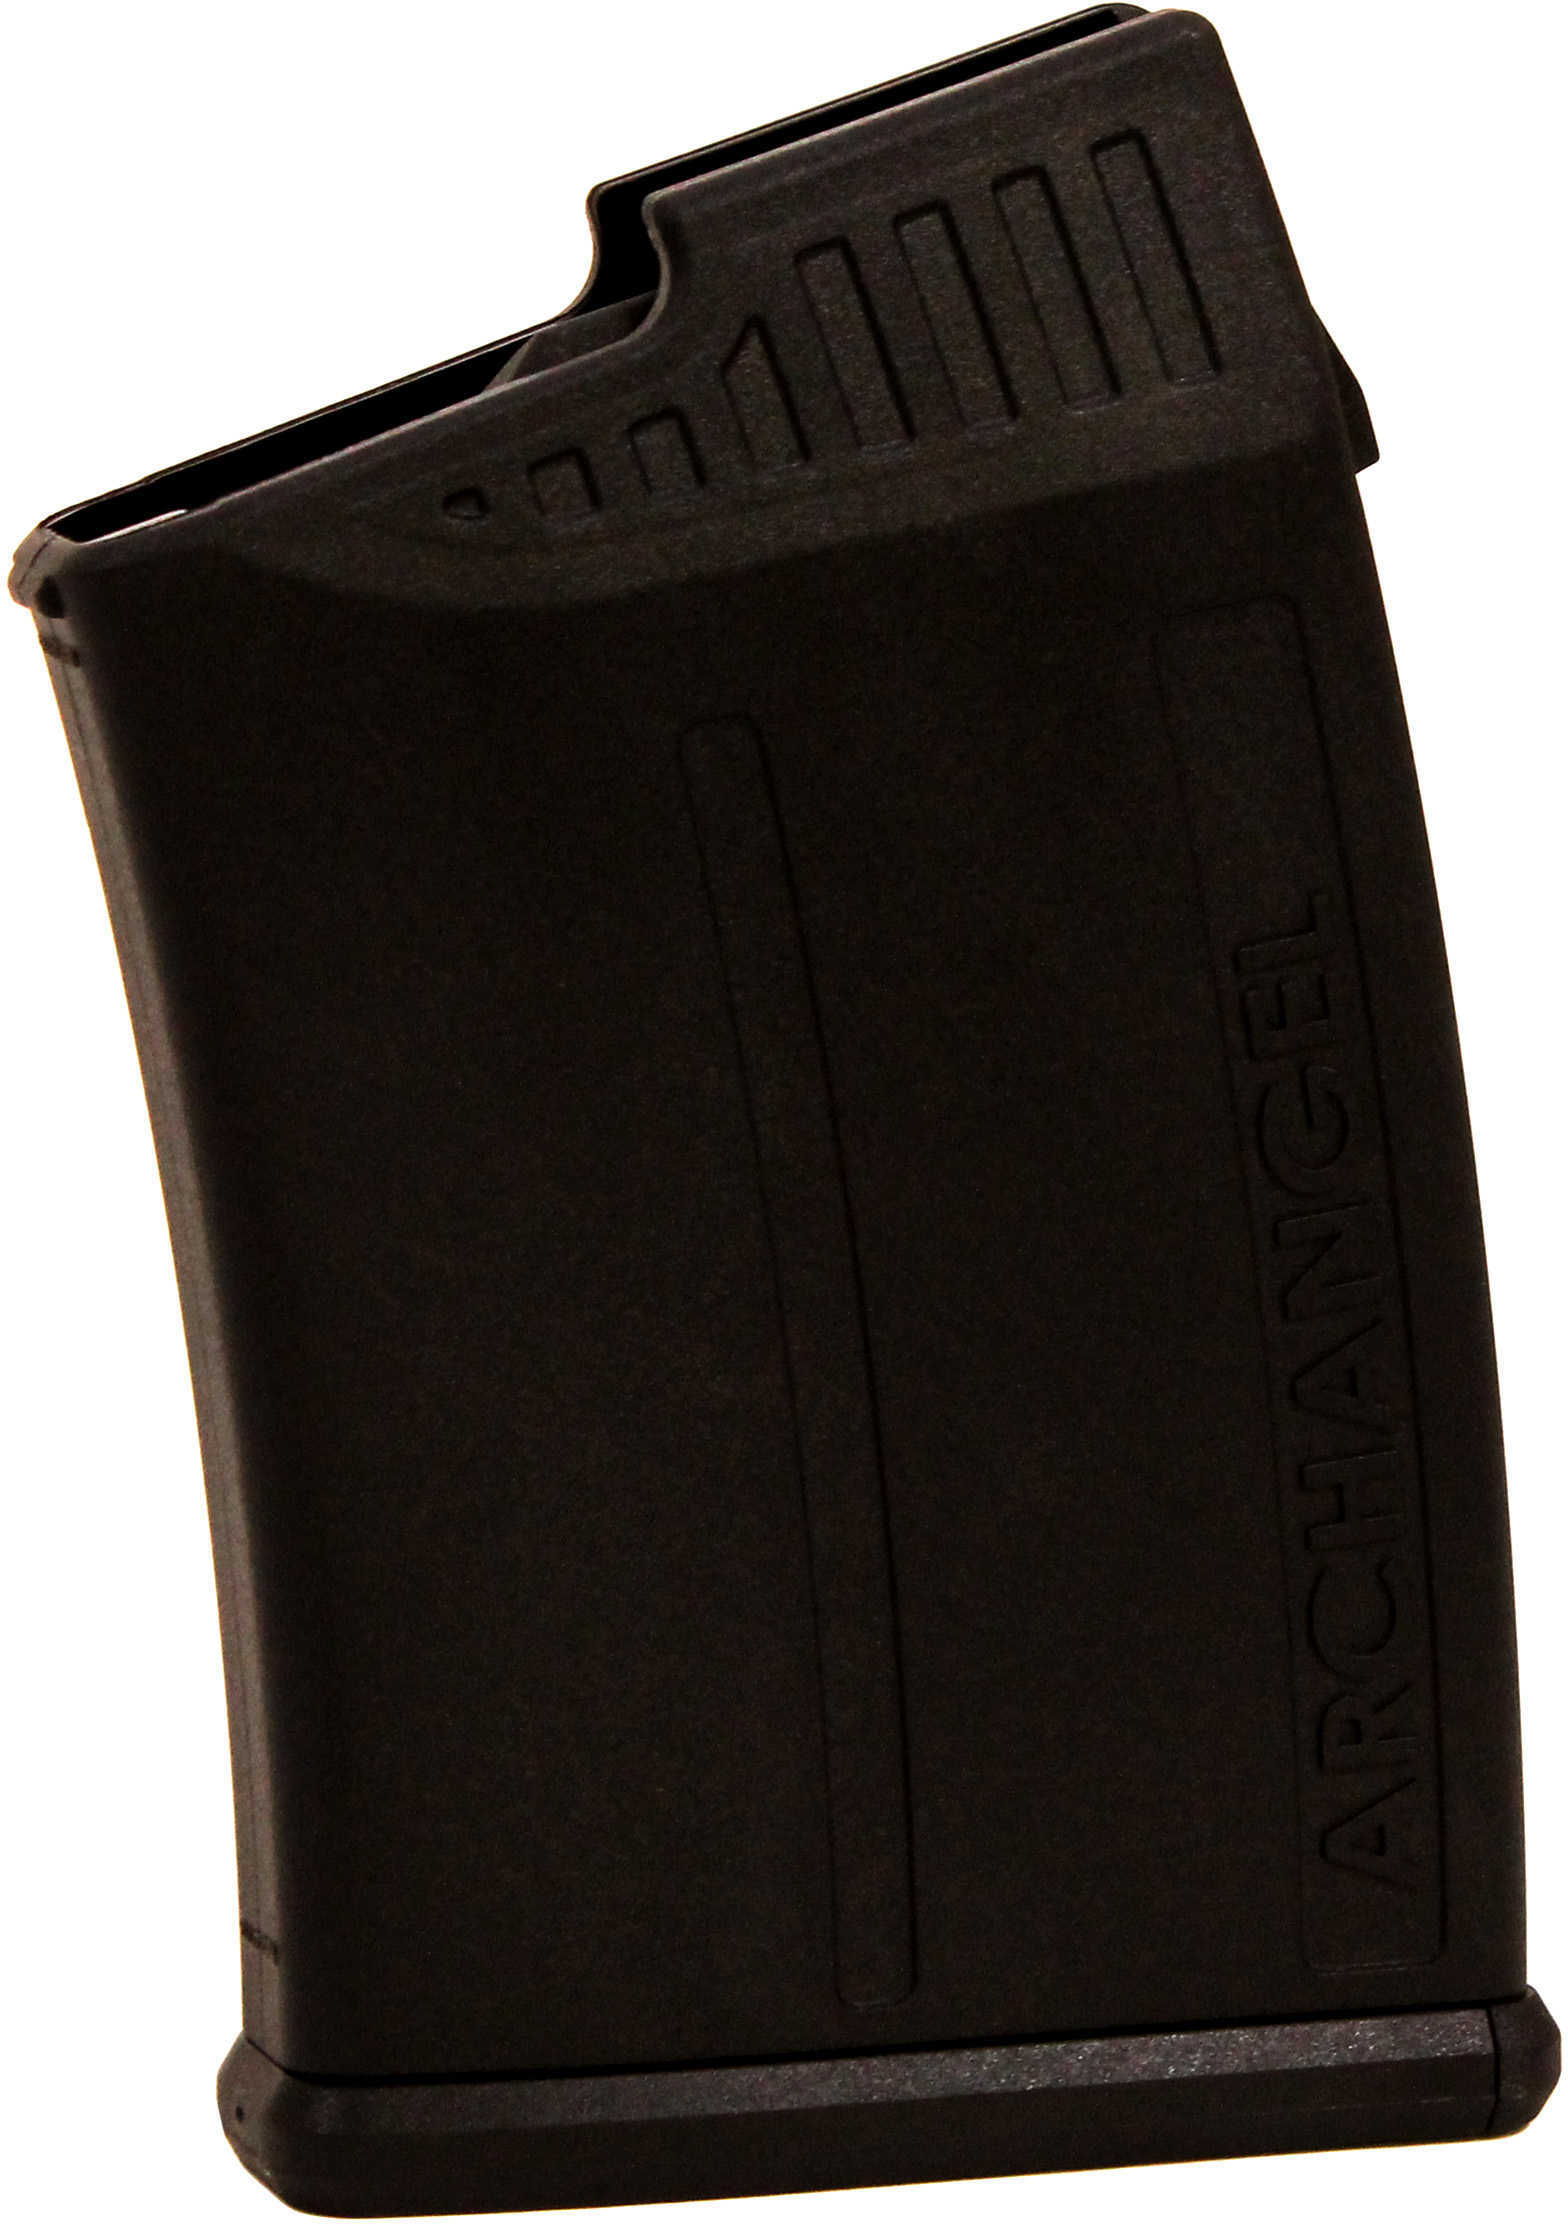 Archangel Magazine AA98 8mm, 15 Rounds, Black Md: AA8MM-A1